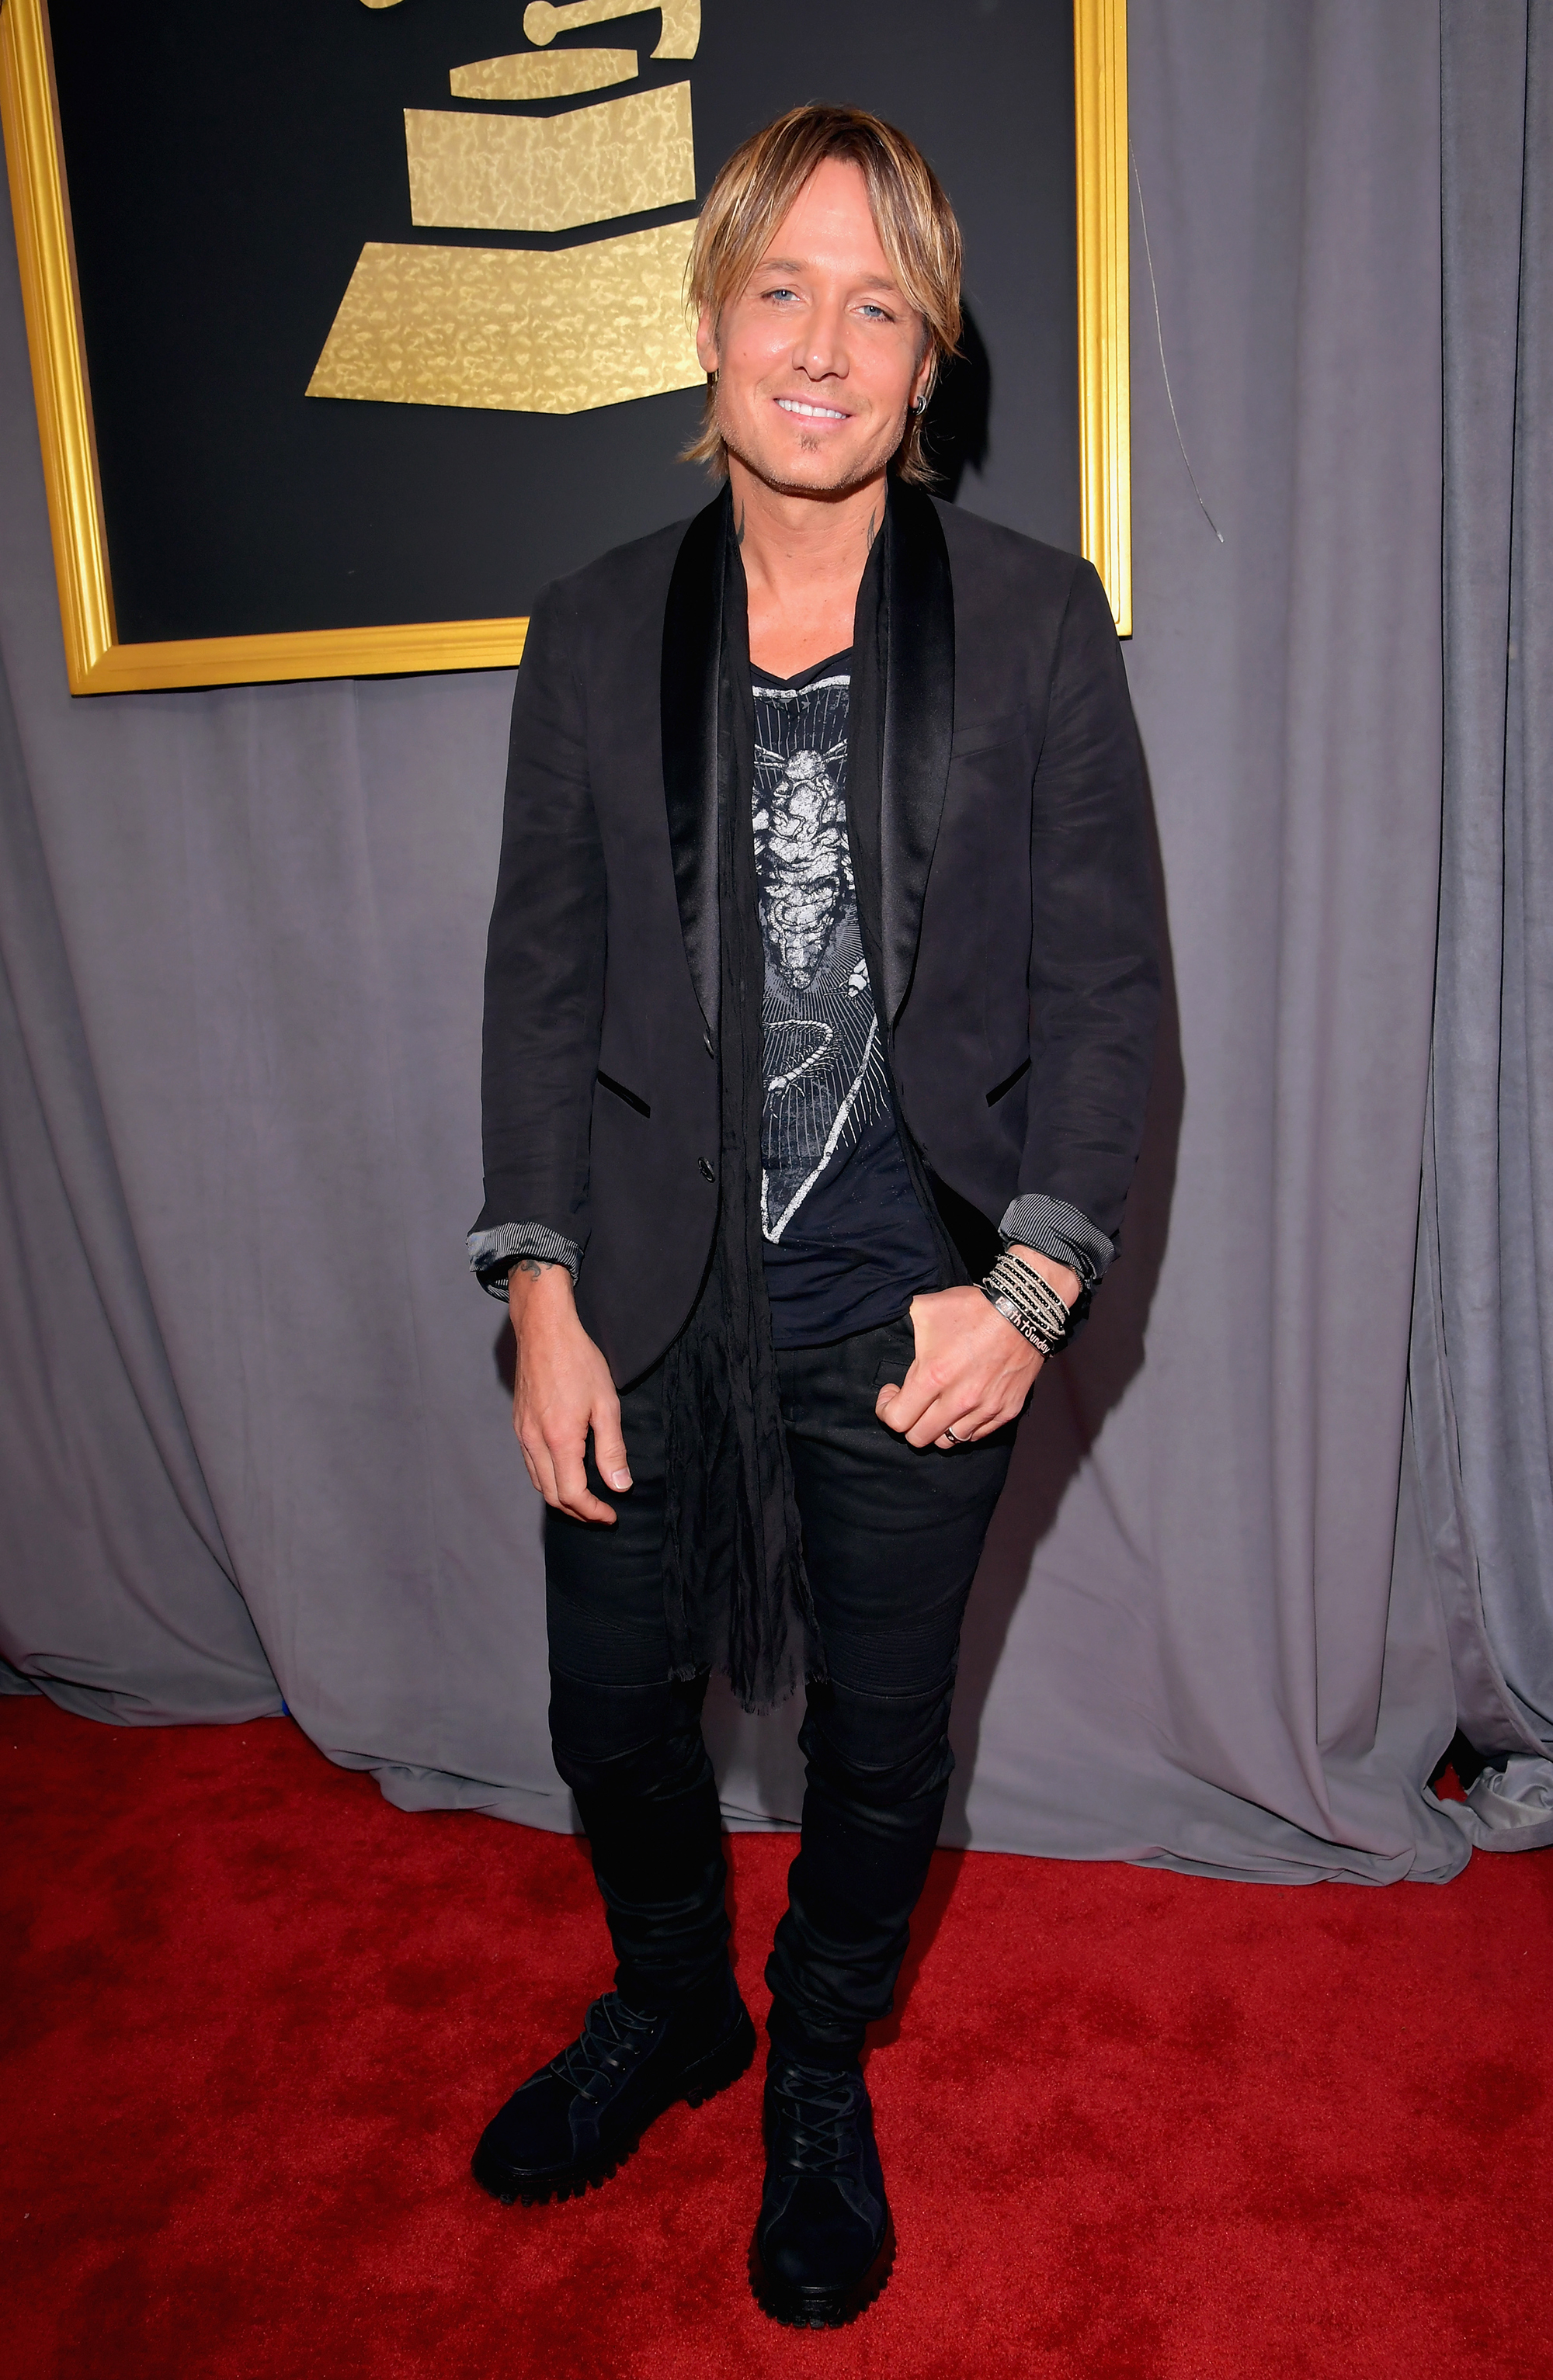 Keith Urban attends the 59th GRAMMY Awards at STAPLES Center, on Feb. 12, 2017 in Los Angeles.